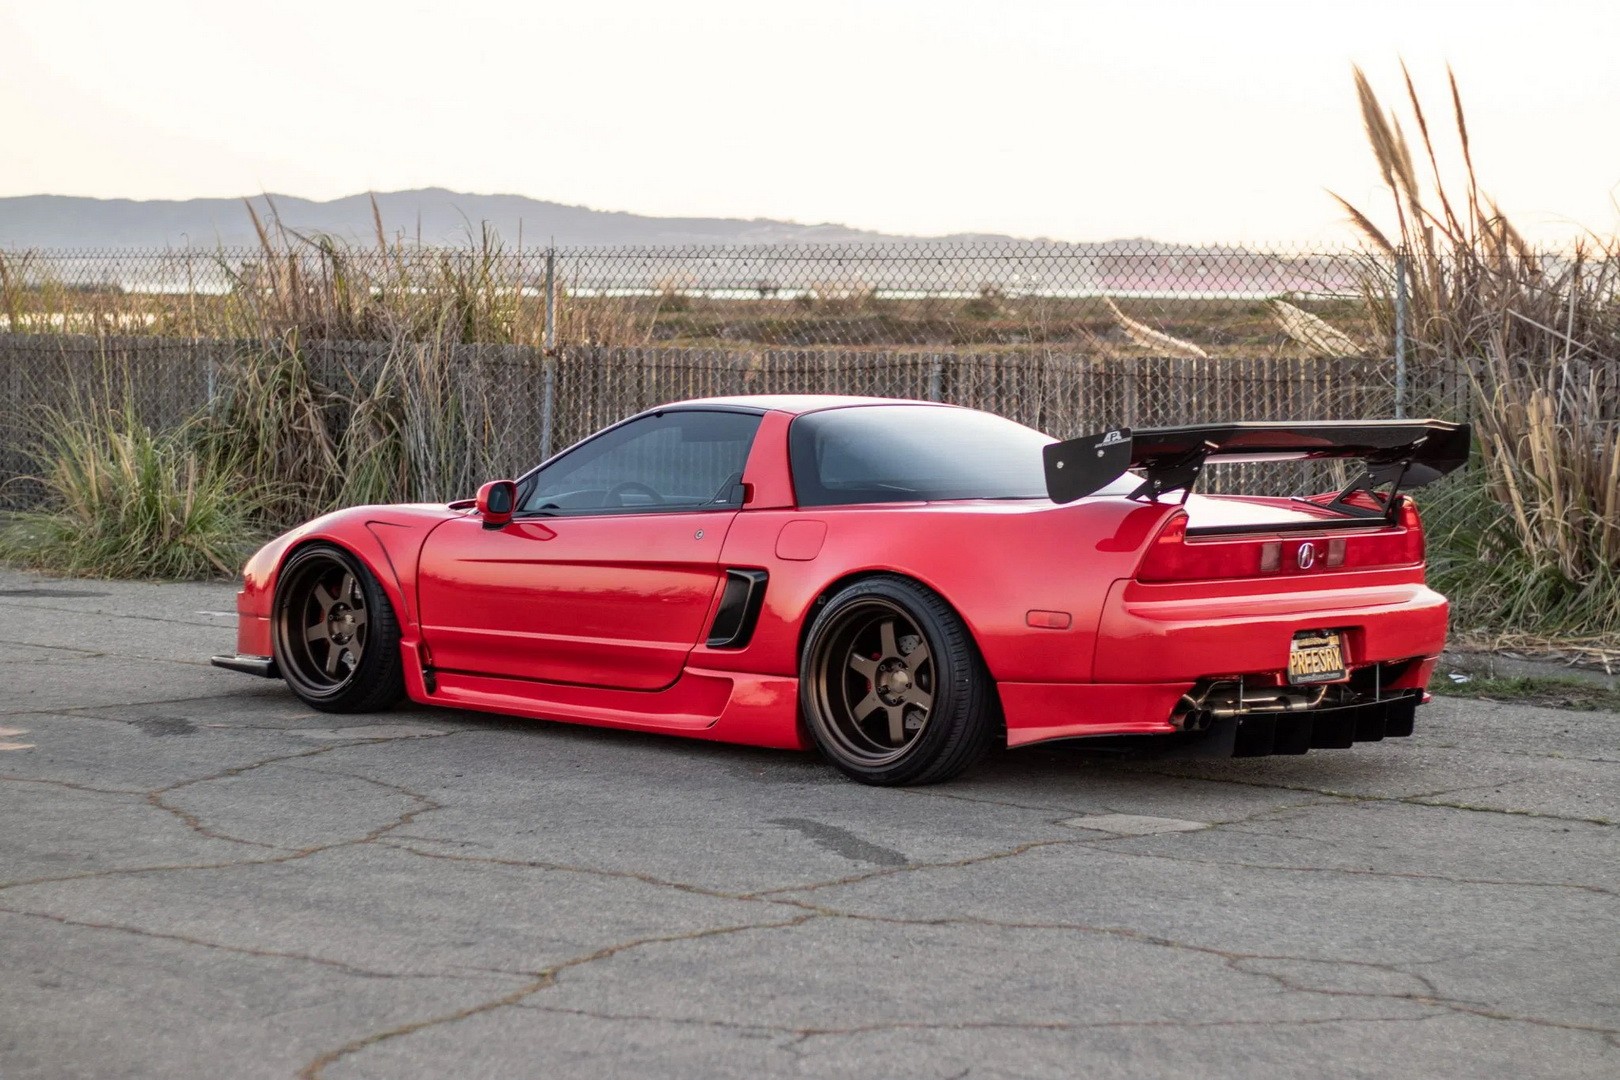 Slammed Widebody 1991 Acura NSX Is a Genuine One-Off With Fast & Furiou...